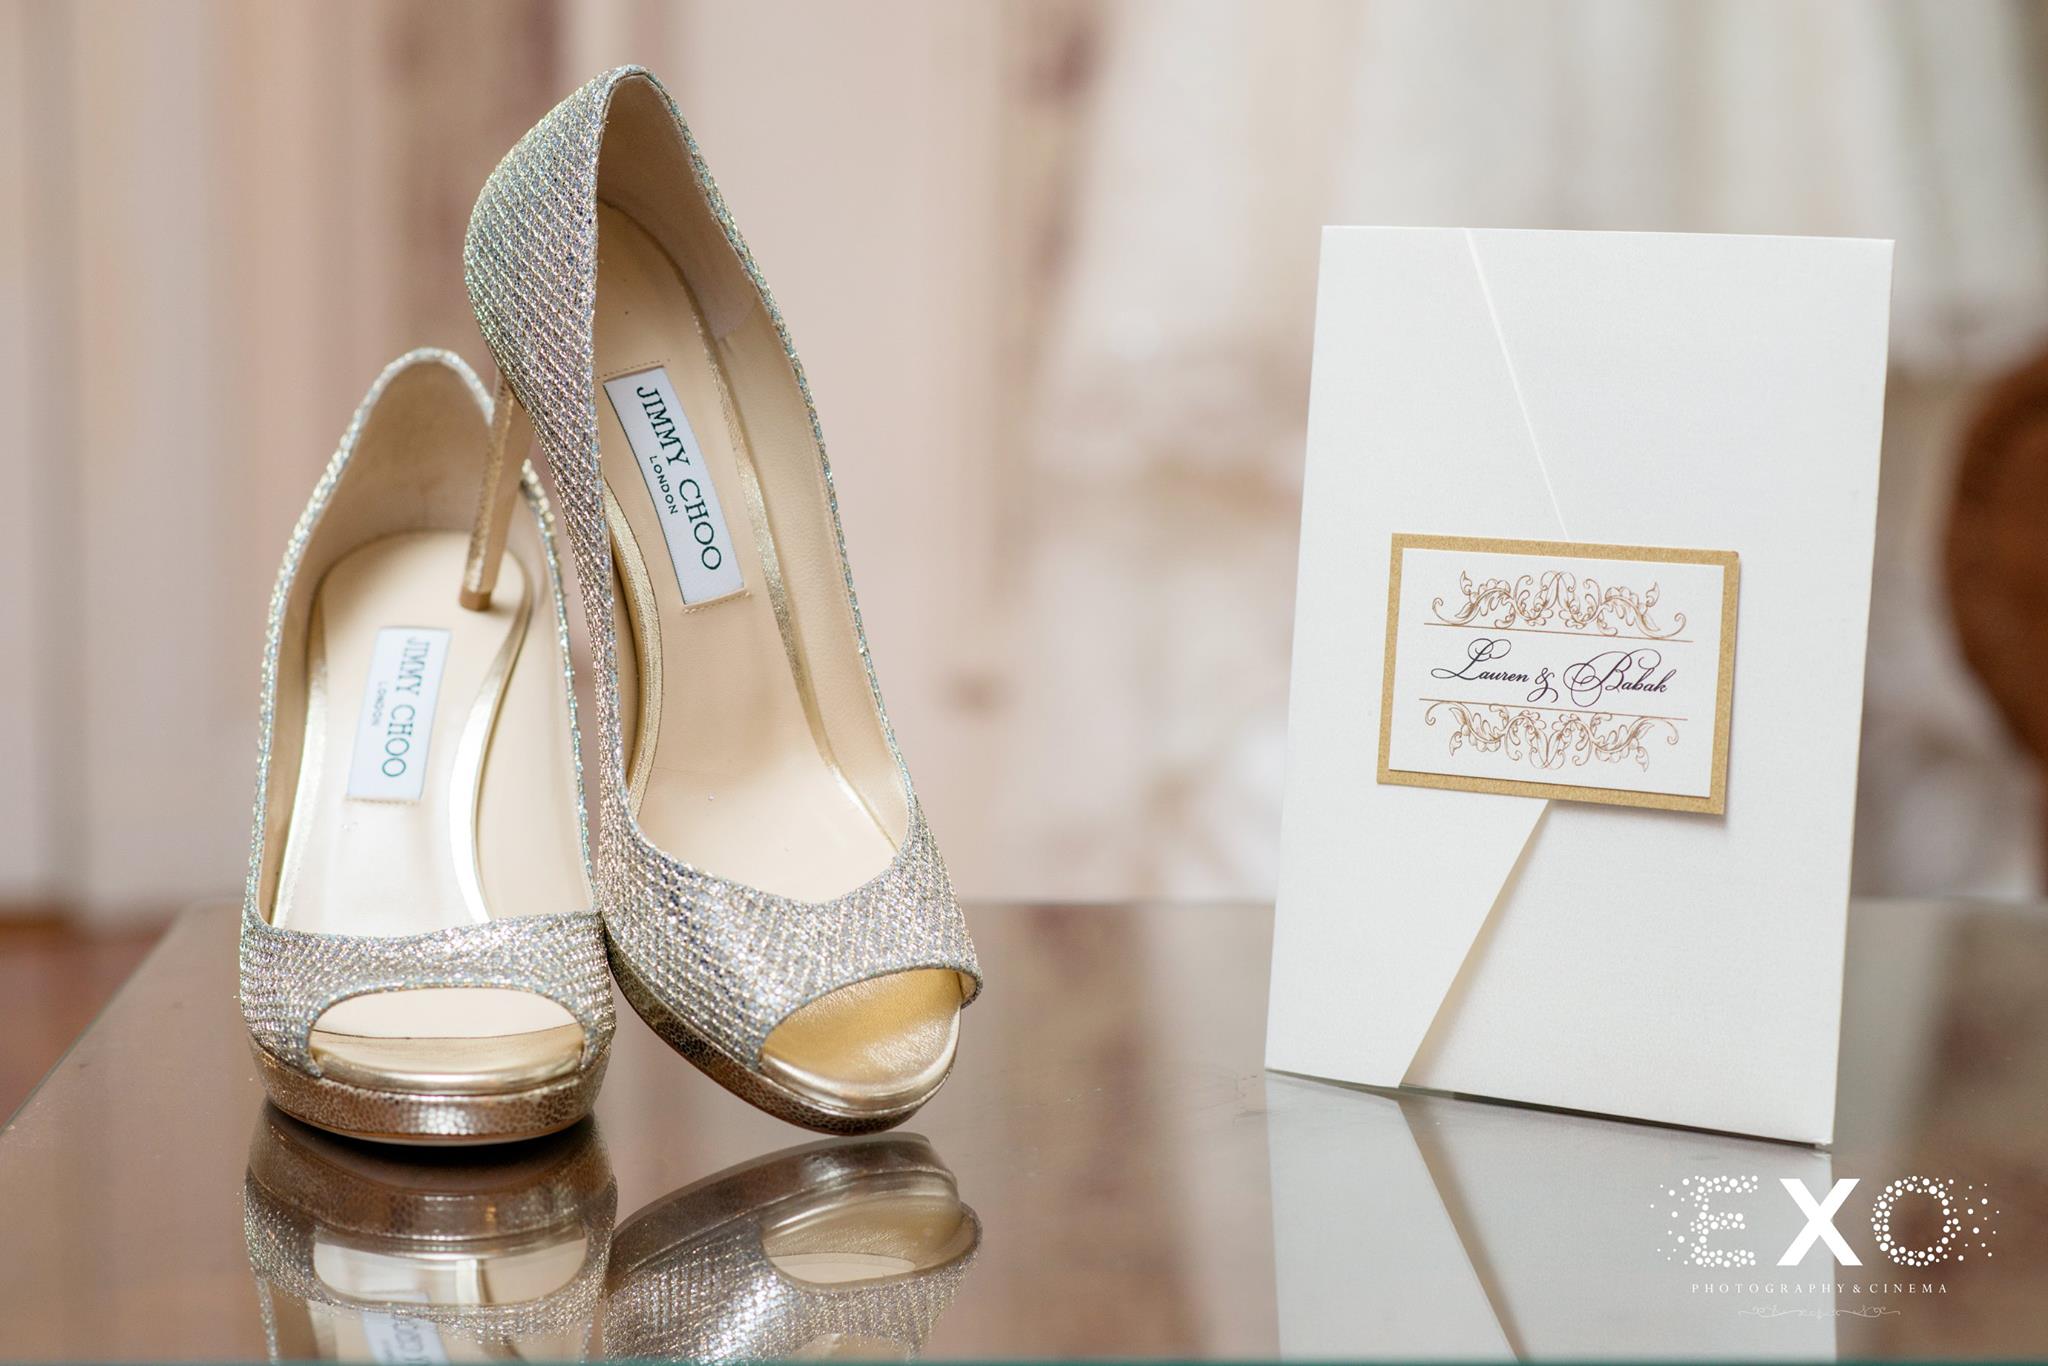 brides Jimmychoo shoes and stationary from j&d invitations